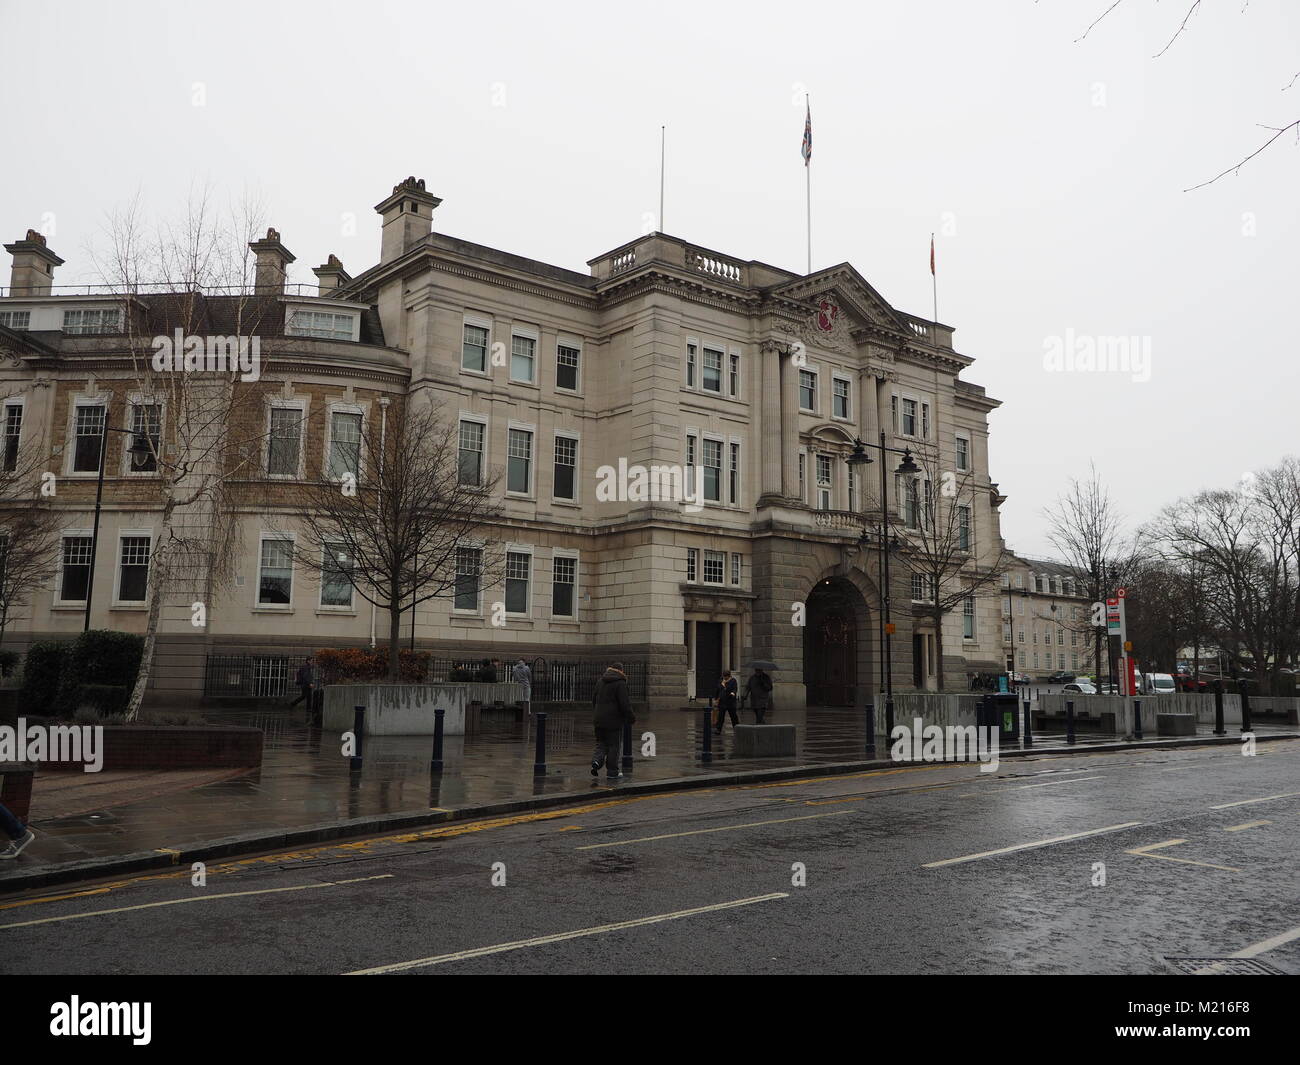 Maidstone, Kent, UK. 3rd Feb, 2018. UK Weather: a cold and wet day with persistent rain. County Hall - headquarters of Kent County Council. Credit: James Bell/Alamy Live News Stock Photo